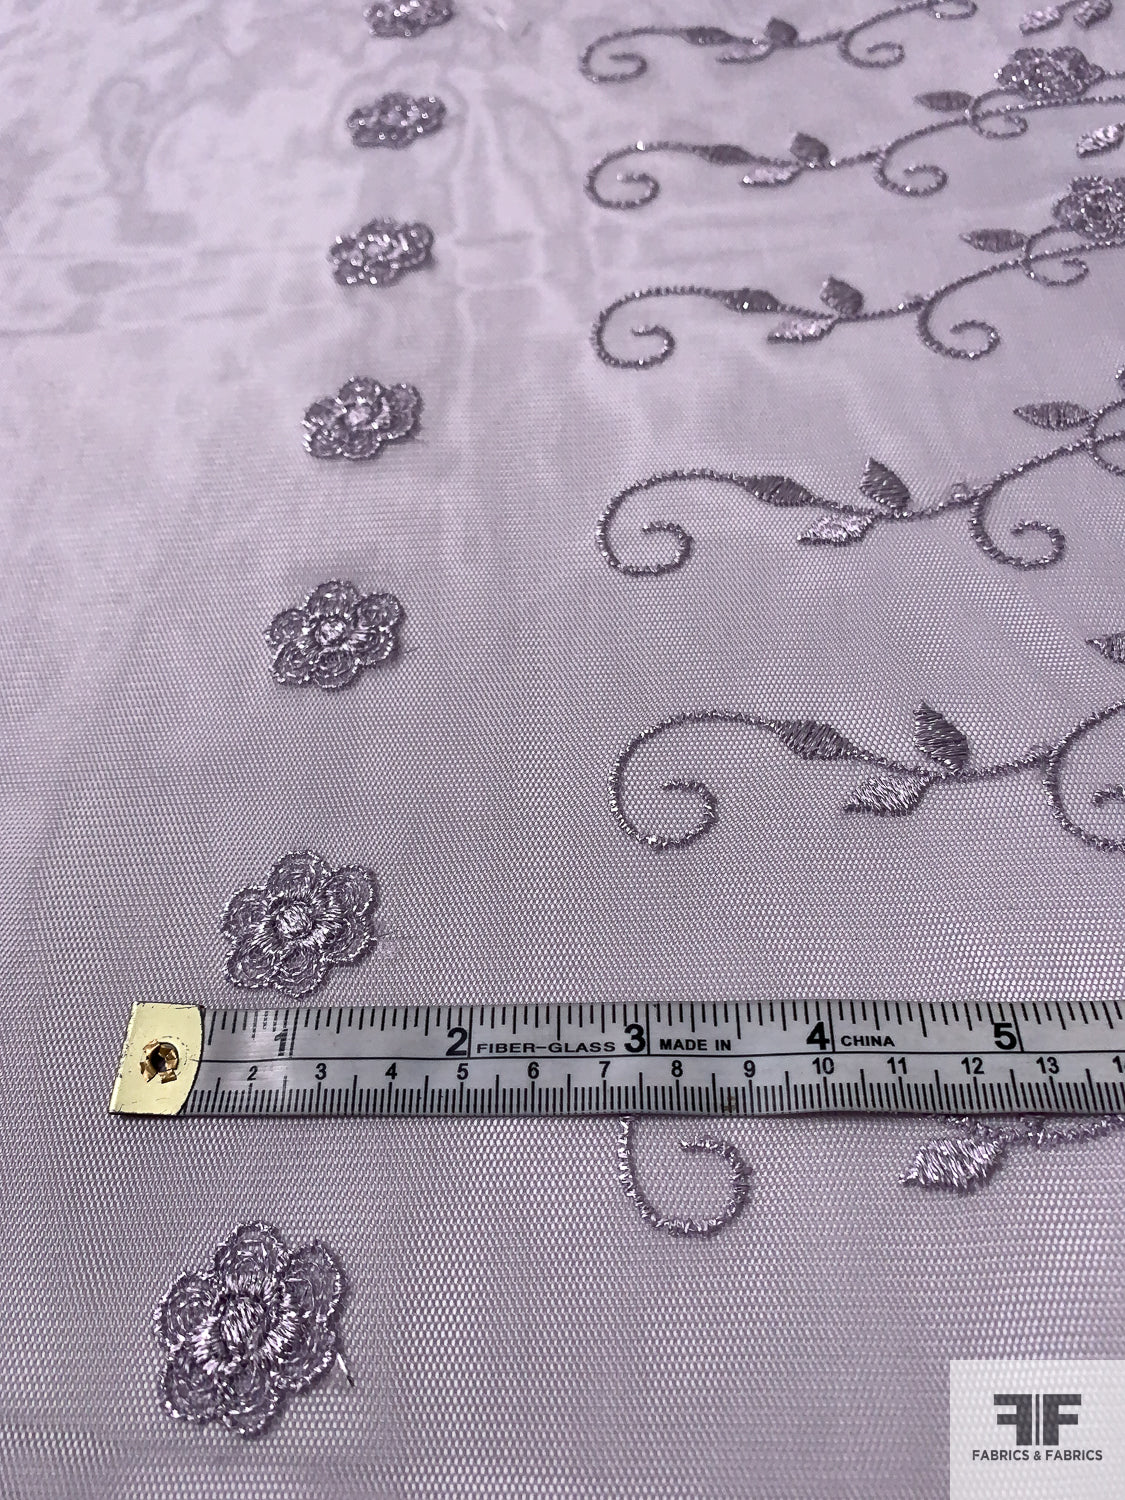 Floral Vine Embroidered Tulle with Guipure Border and Metallic Detailing - Dusty Lilac / Silver